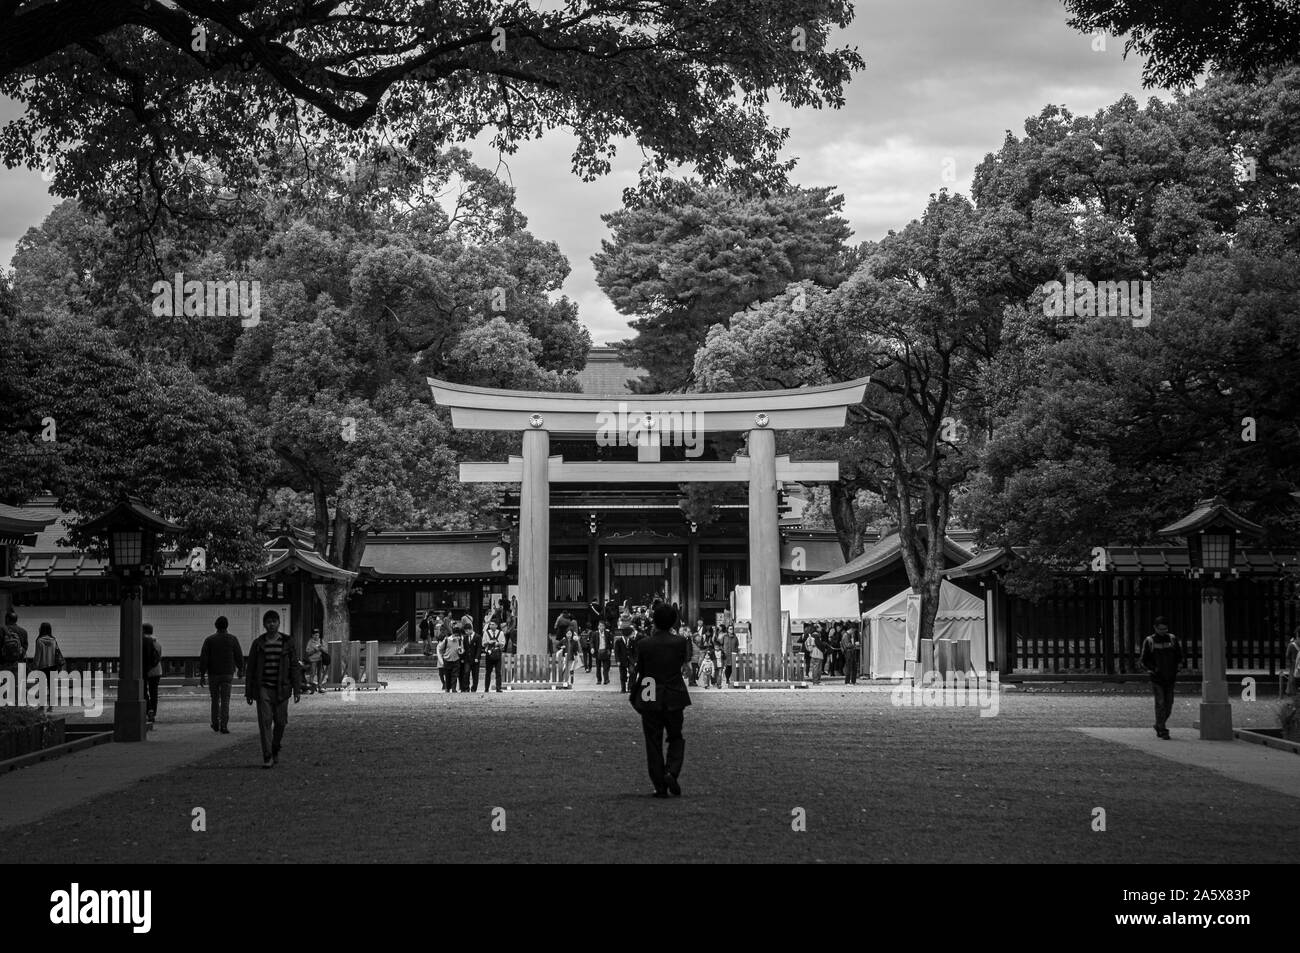 Meiji Jingu Shrine Historic Wooden Torii gate under big trees - Most important shrine and city green space of Japan capital city. Black and white imag Stock Photo